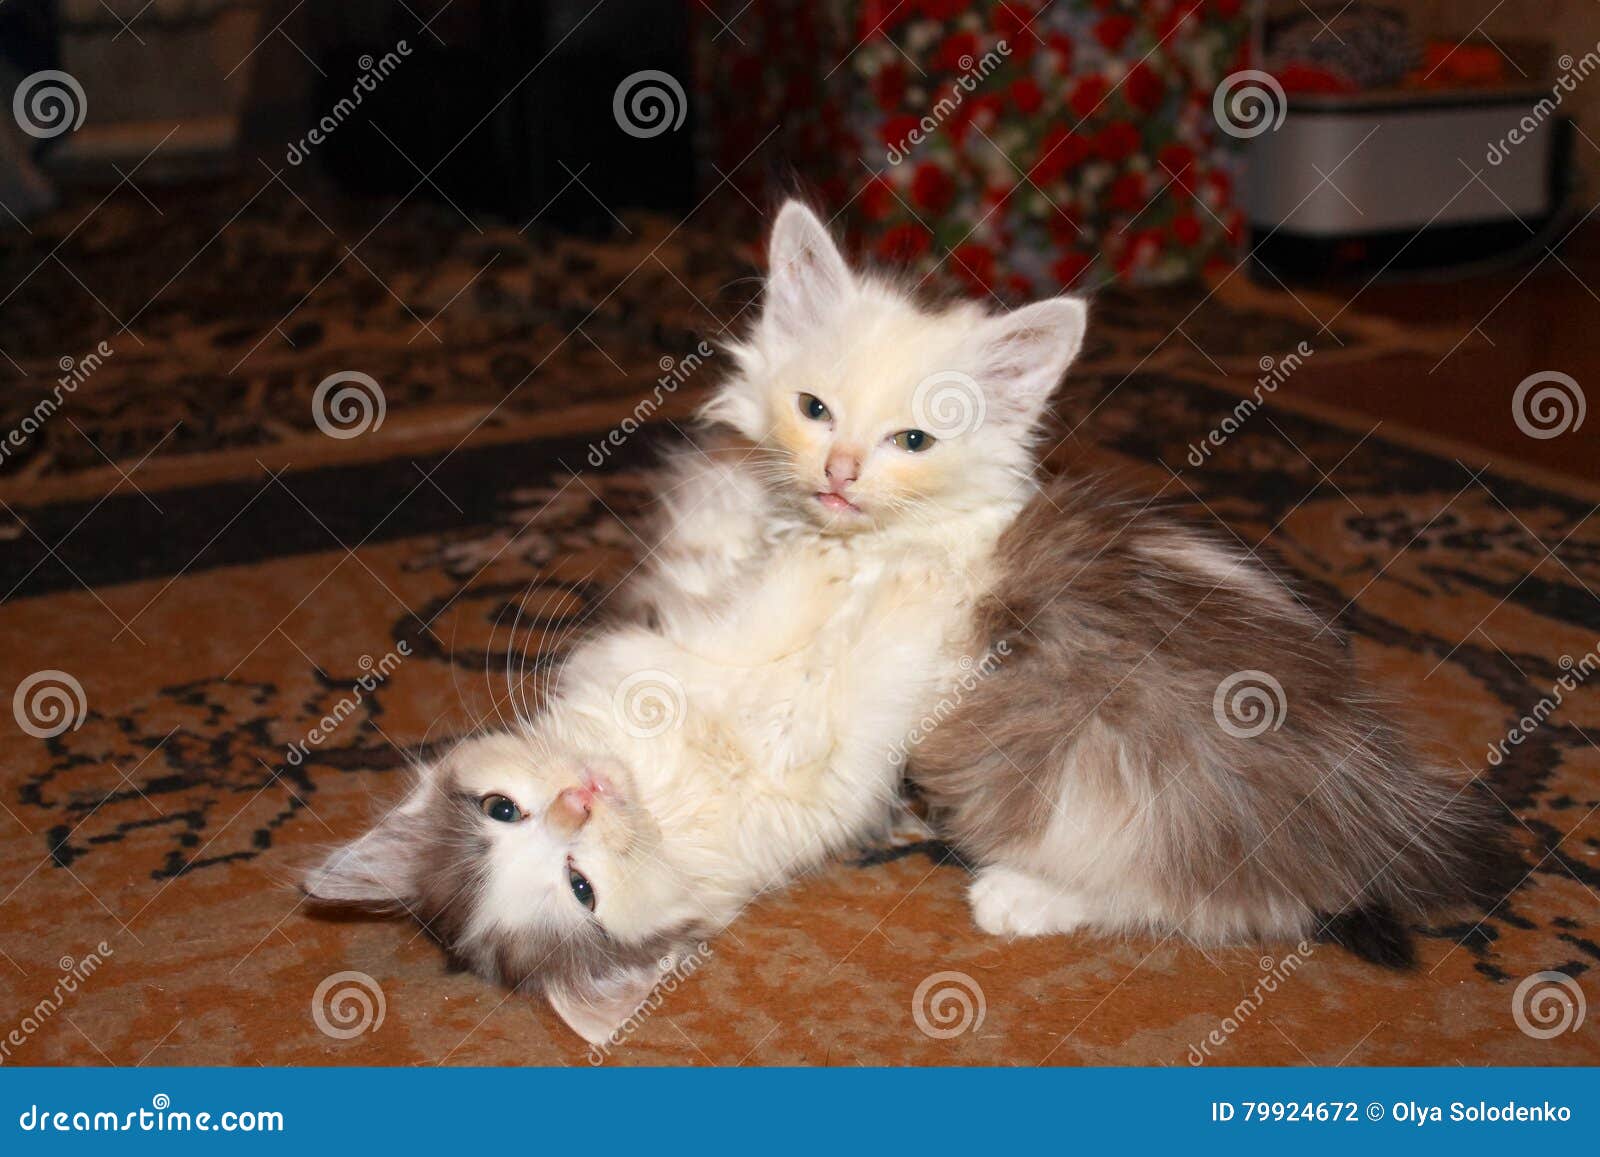 Two Little Kittens Playing Together Stock Photo - Image of little ...